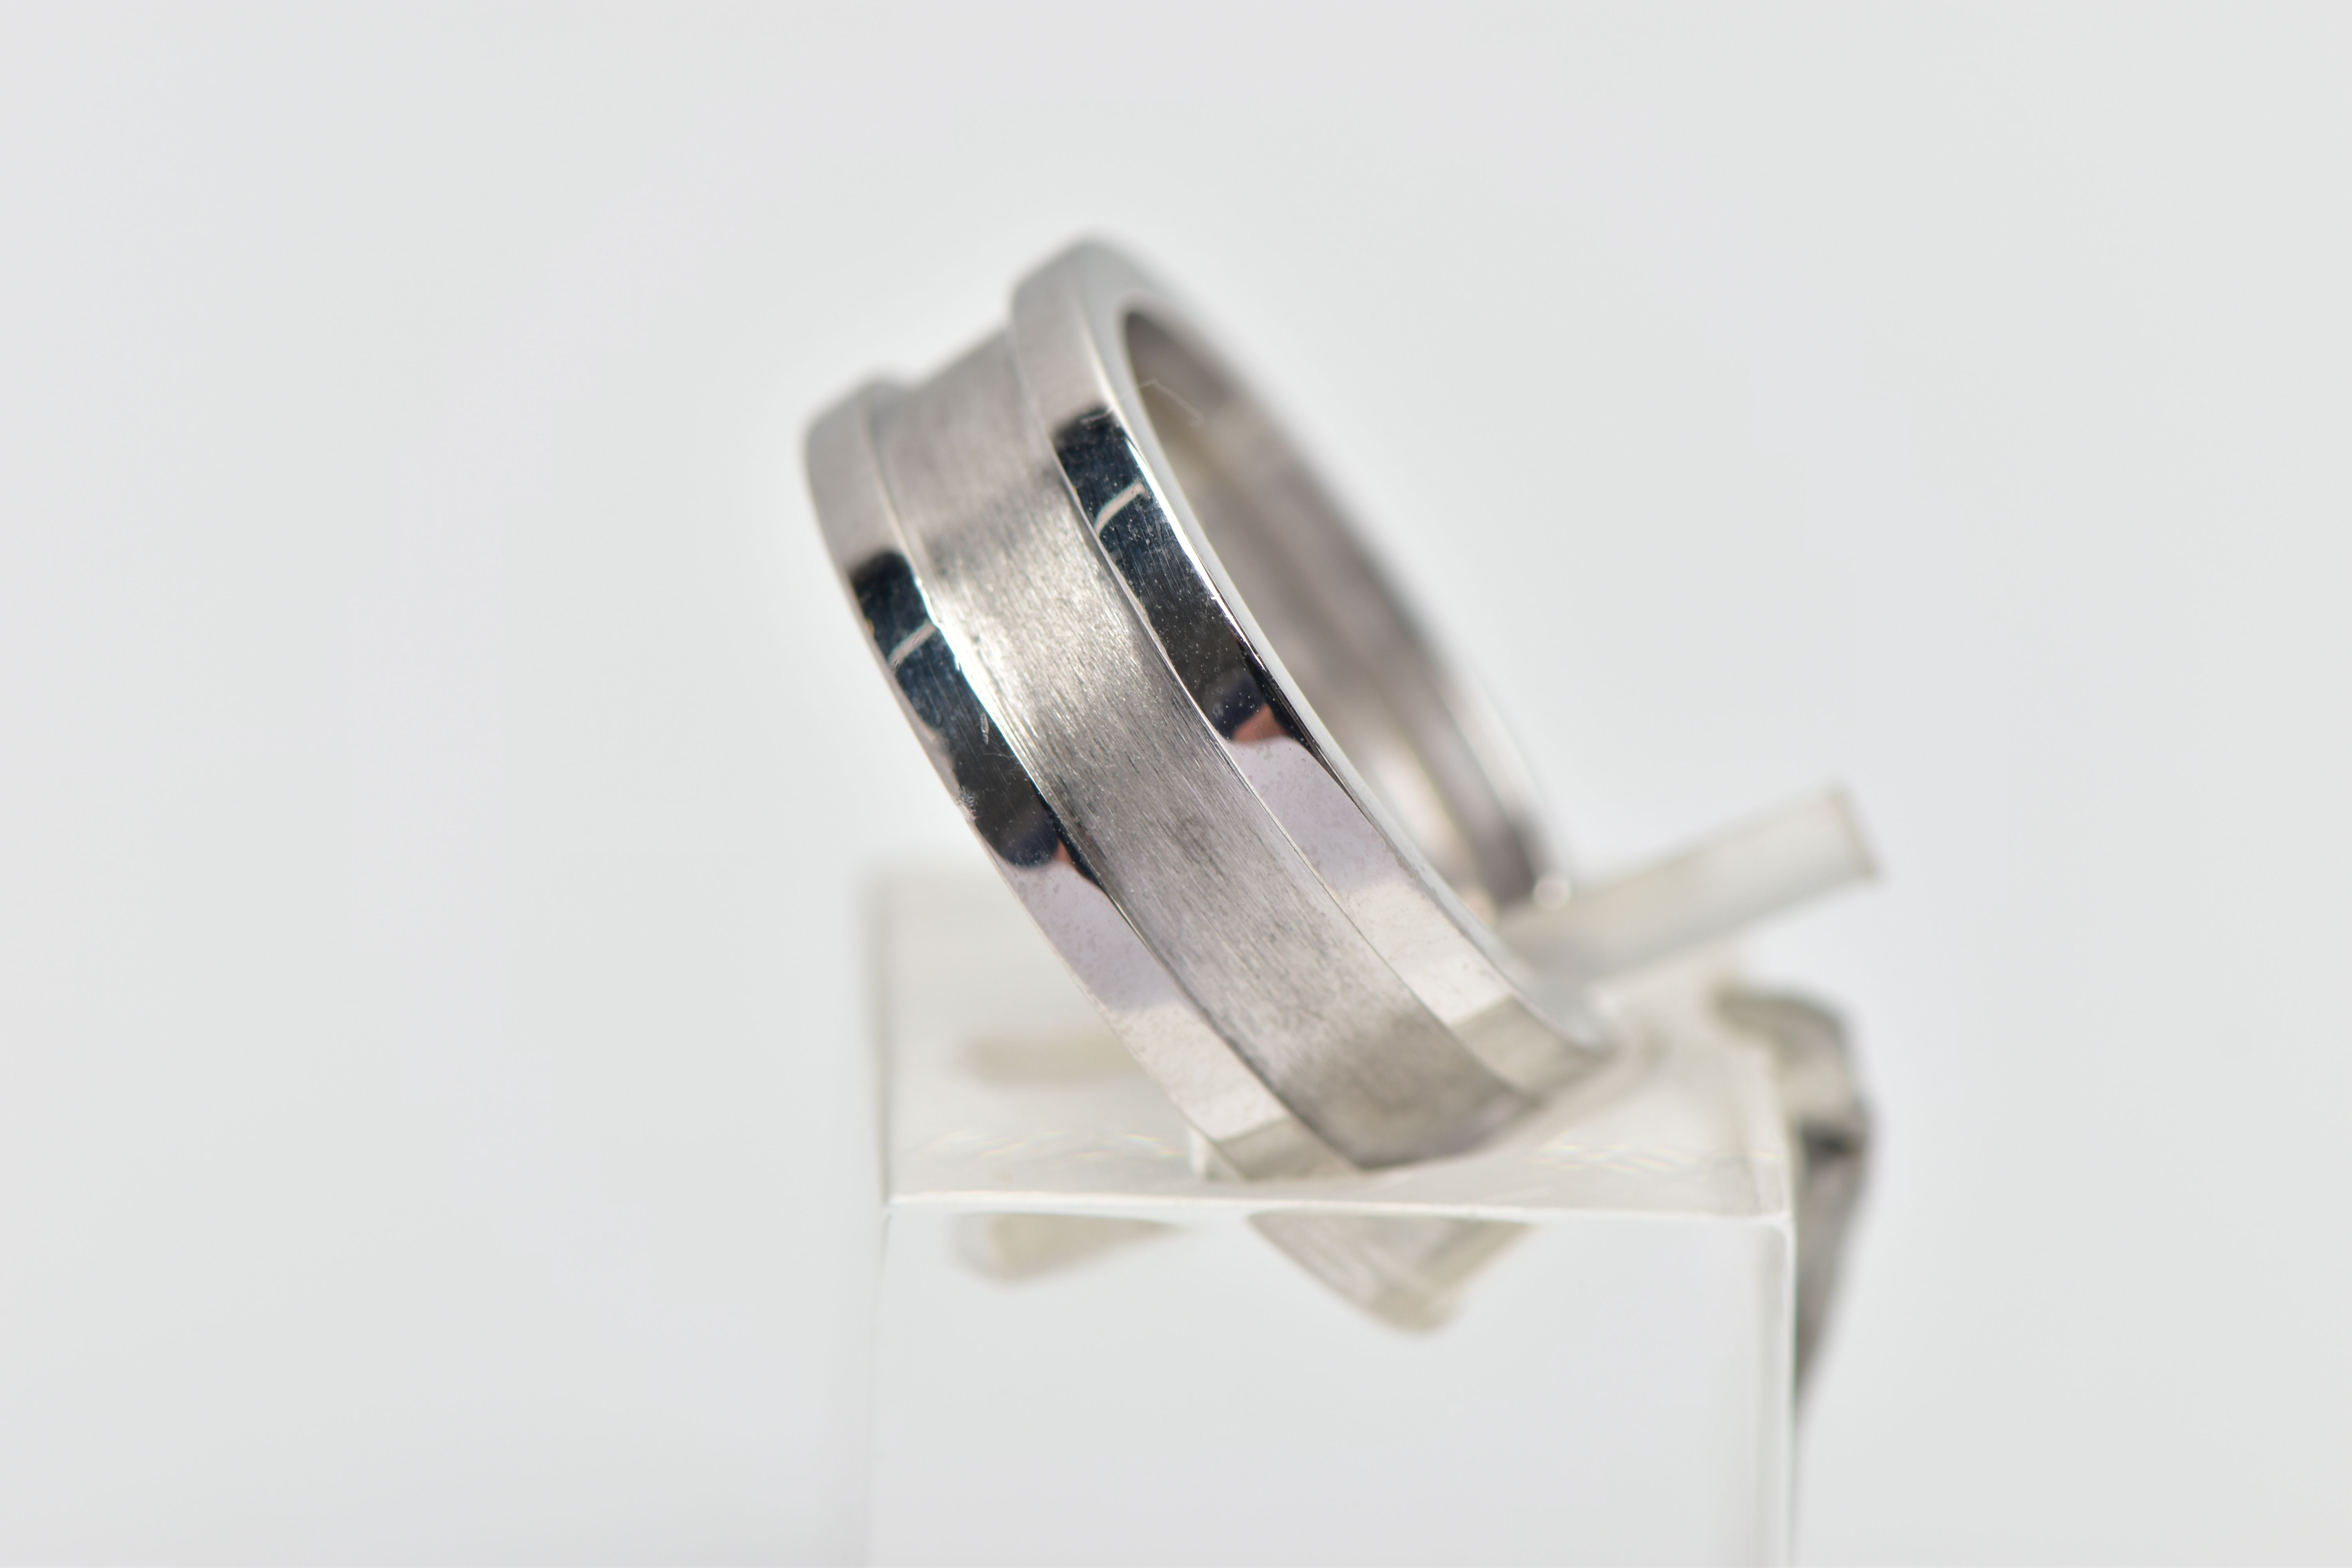 A 'C DE CARTIER' RING BY CARTIER, with polished and brushed detail, signed and numbered Cartier - Image 2 of 3